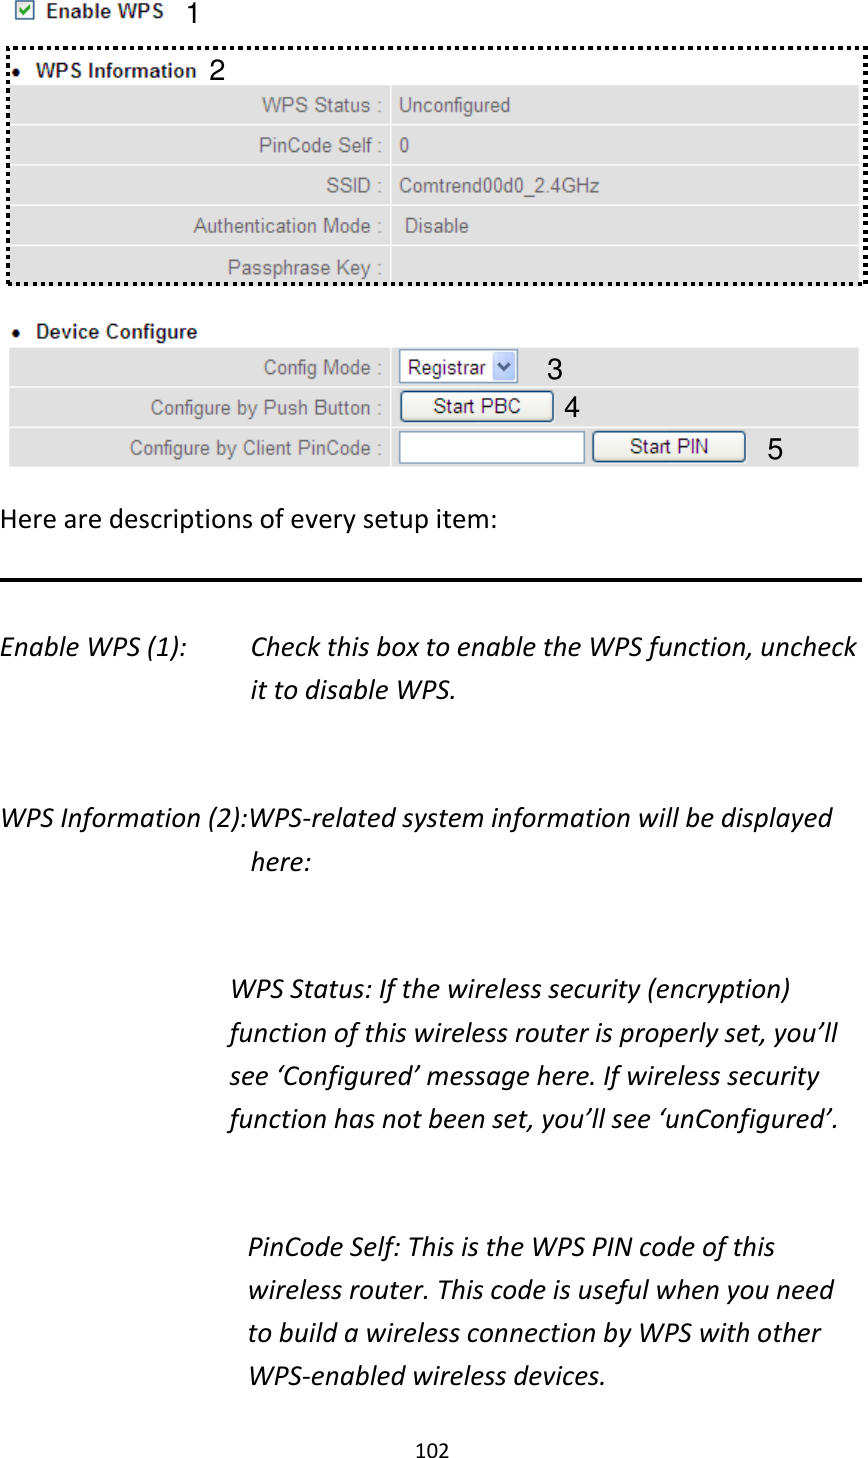 102  Here are descriptions of every setup item:  Enable WPS (1):  Check this box to enable the WPS function, uncheck it to disable WPS.  WPS Information (2):WPS-related system information will be displayed here:  WPS Status: If the wireless security (encryption) function of this wireless router is properly set, you’ll see ‘Configured’ message here. If wireless security function has not been set, you’ll see ‘unConfigured’.  PinCode Self: This is the WPS PIN code of this wireless router. This code is useful when you need to build a wireless connection by WPS with other WPS-enabled wireless devices. 1 3 4 2 5 